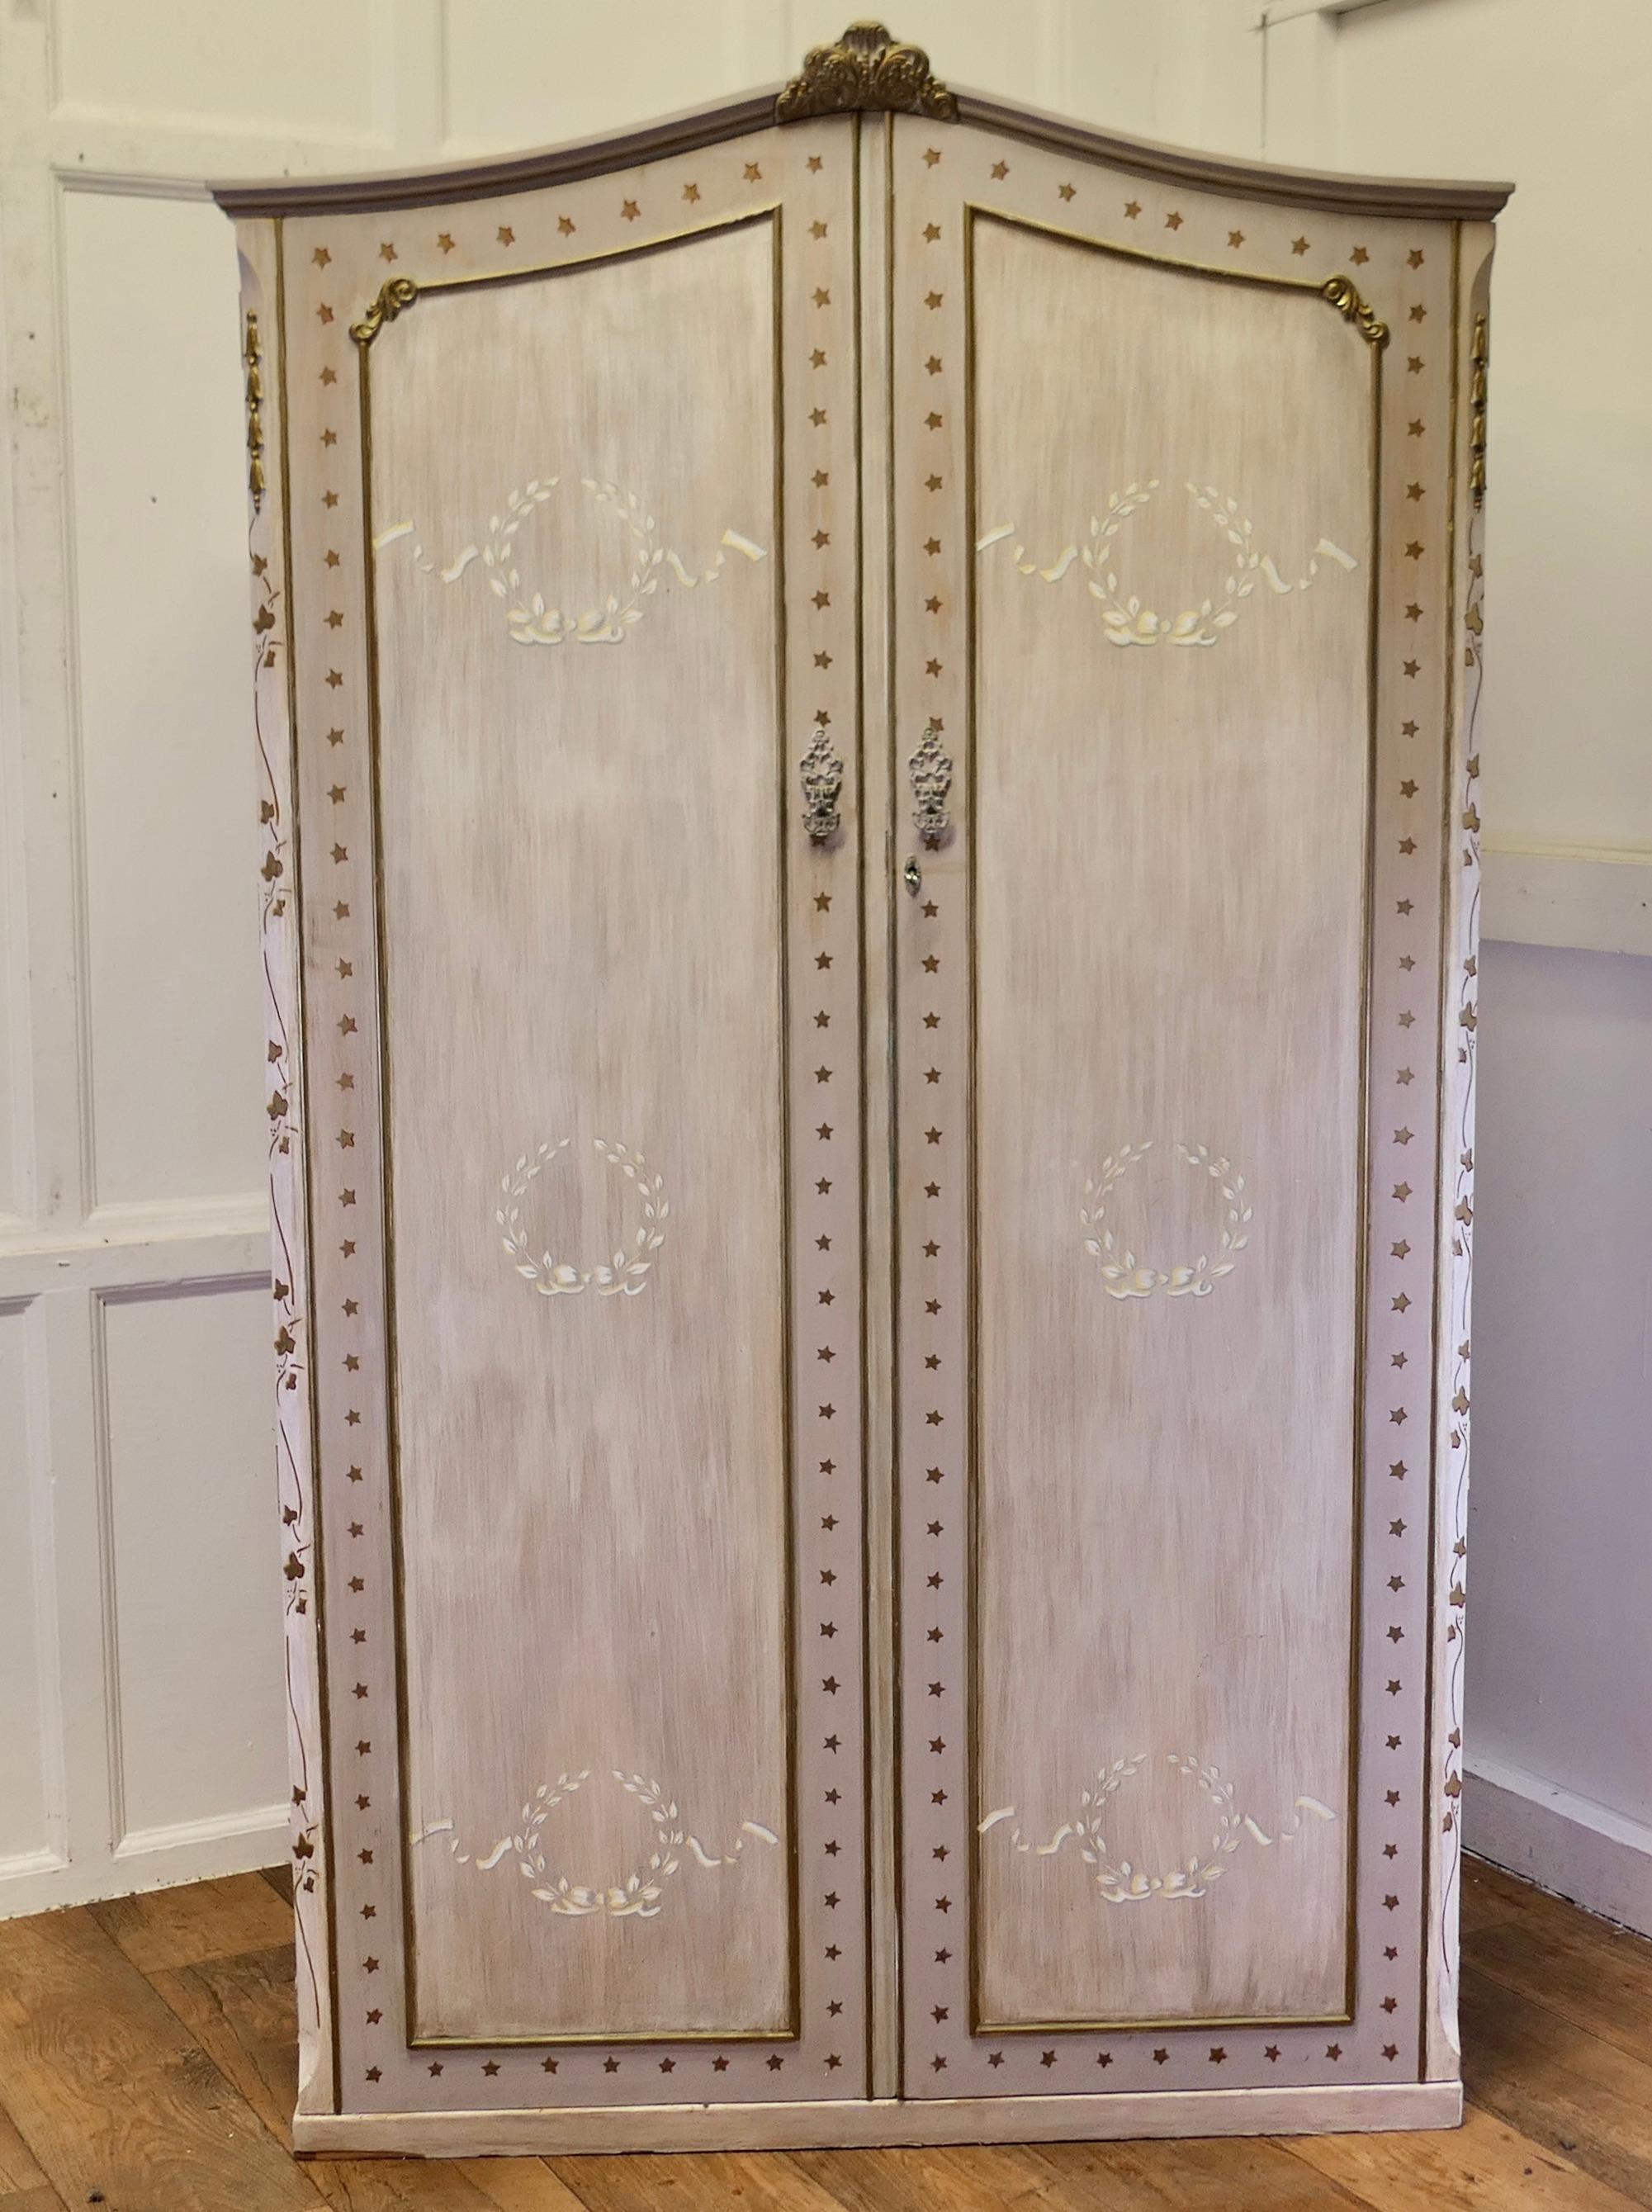 Hand Painted Armoire/Compactum from South of France

Beautifully painted and unrestored French Country wardrobe, this is a tall piece with a dome shaped top and 2 doors. Inside on the right hand side it has a hat shelf at the top 4 small glass